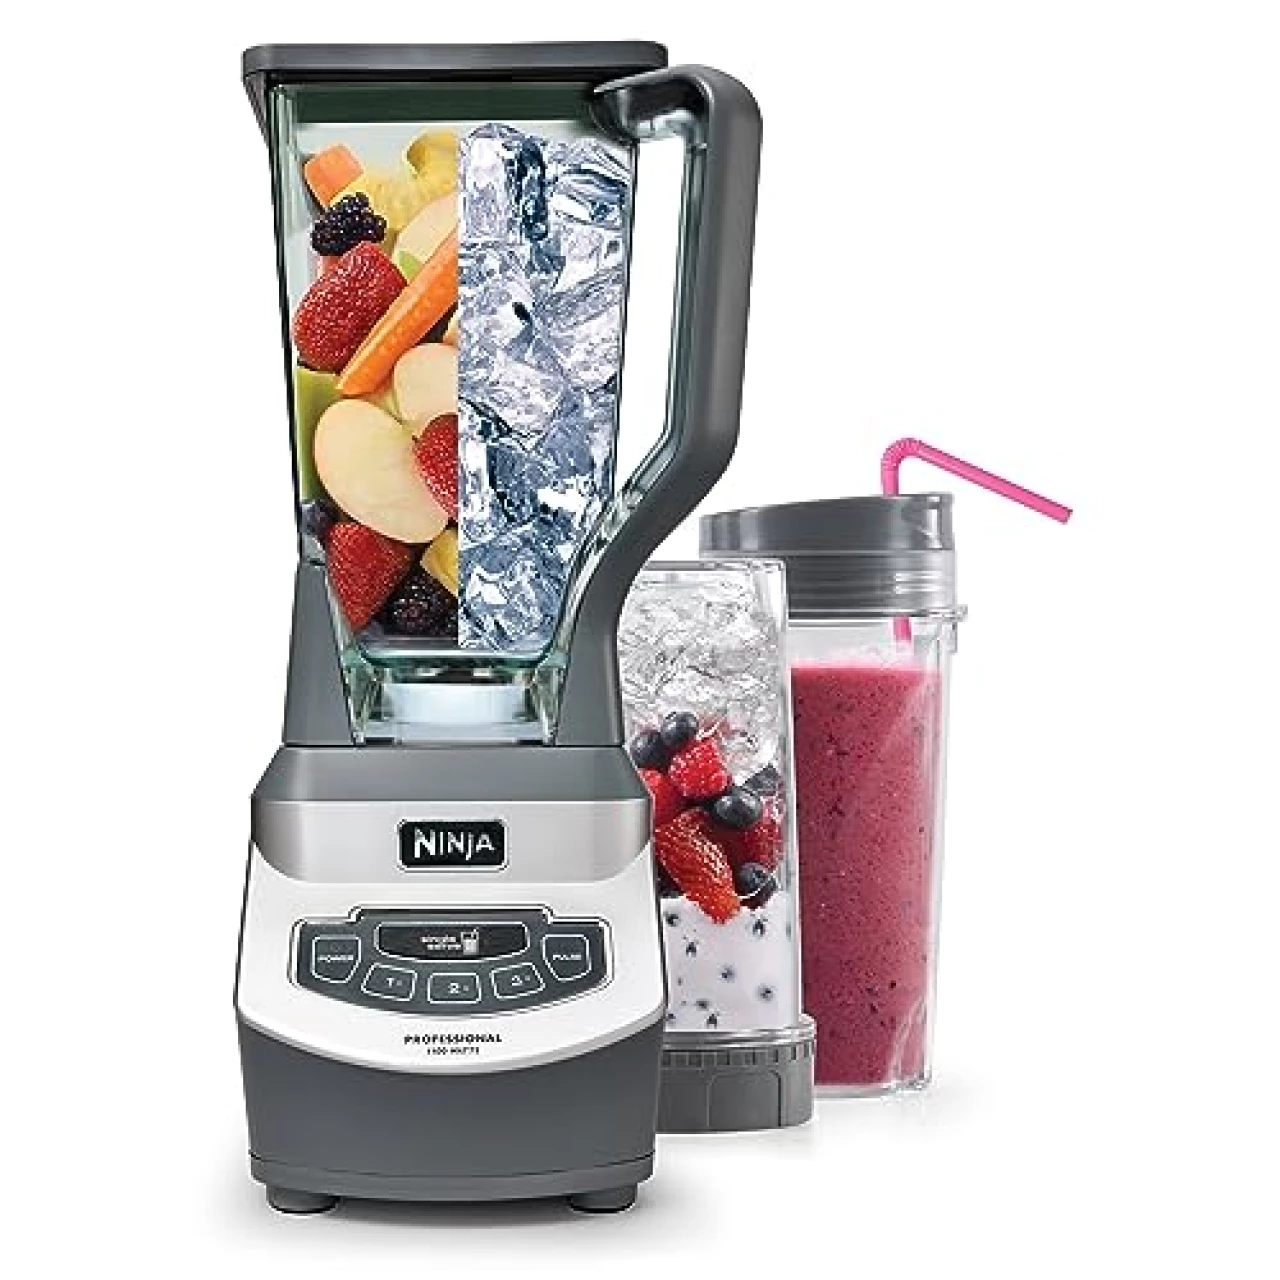 Ninja BL660 Professional Compact Smoothie &amp; Food Processing Blender, 1100-Watts, 3 Functions -for Frozen Drinks, Smoothies, Sauces, &amp; More, 72-oz.* Pitcher, (2) 16-oz. To-Go Cups &amp; Spout Lids, Gray